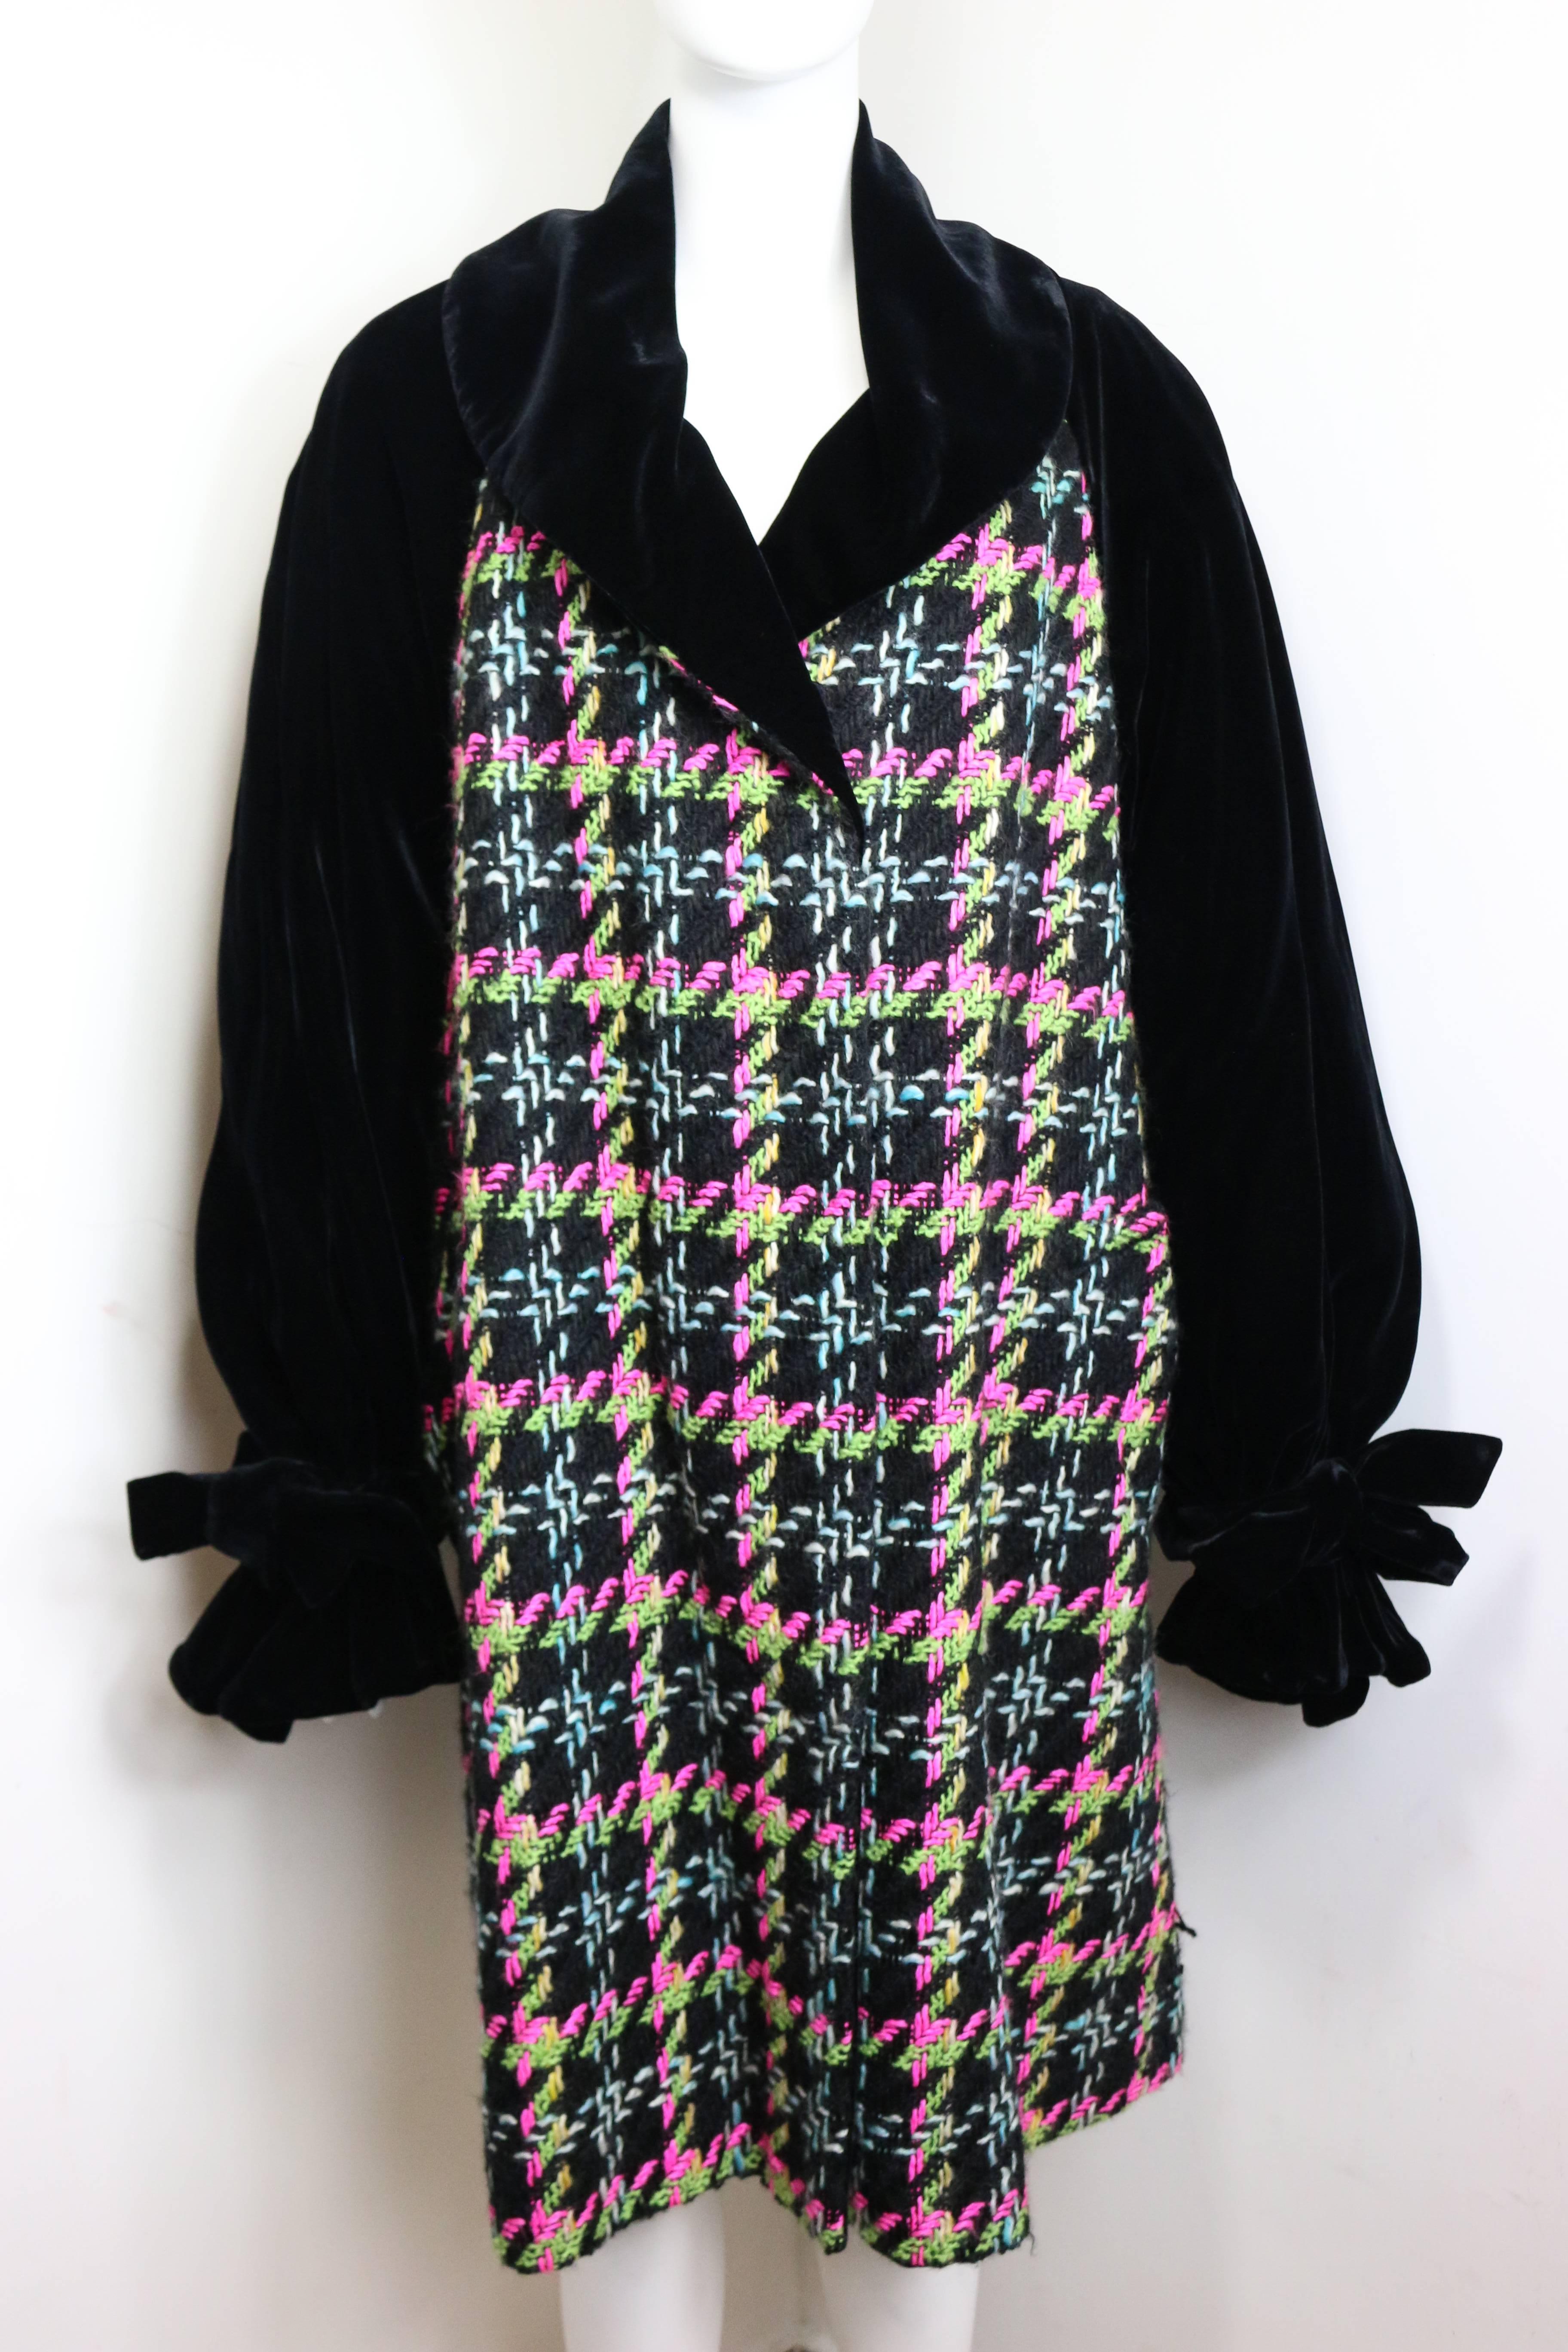 - Vintage Christian Lacroix black velvet combined with colours(pink, green, blue, white, black) houndstooth tweed oversized long coat from fall 1991 collection. 

- Featuring a black velvet shawl collar and sleeves . Four black velvet buttons